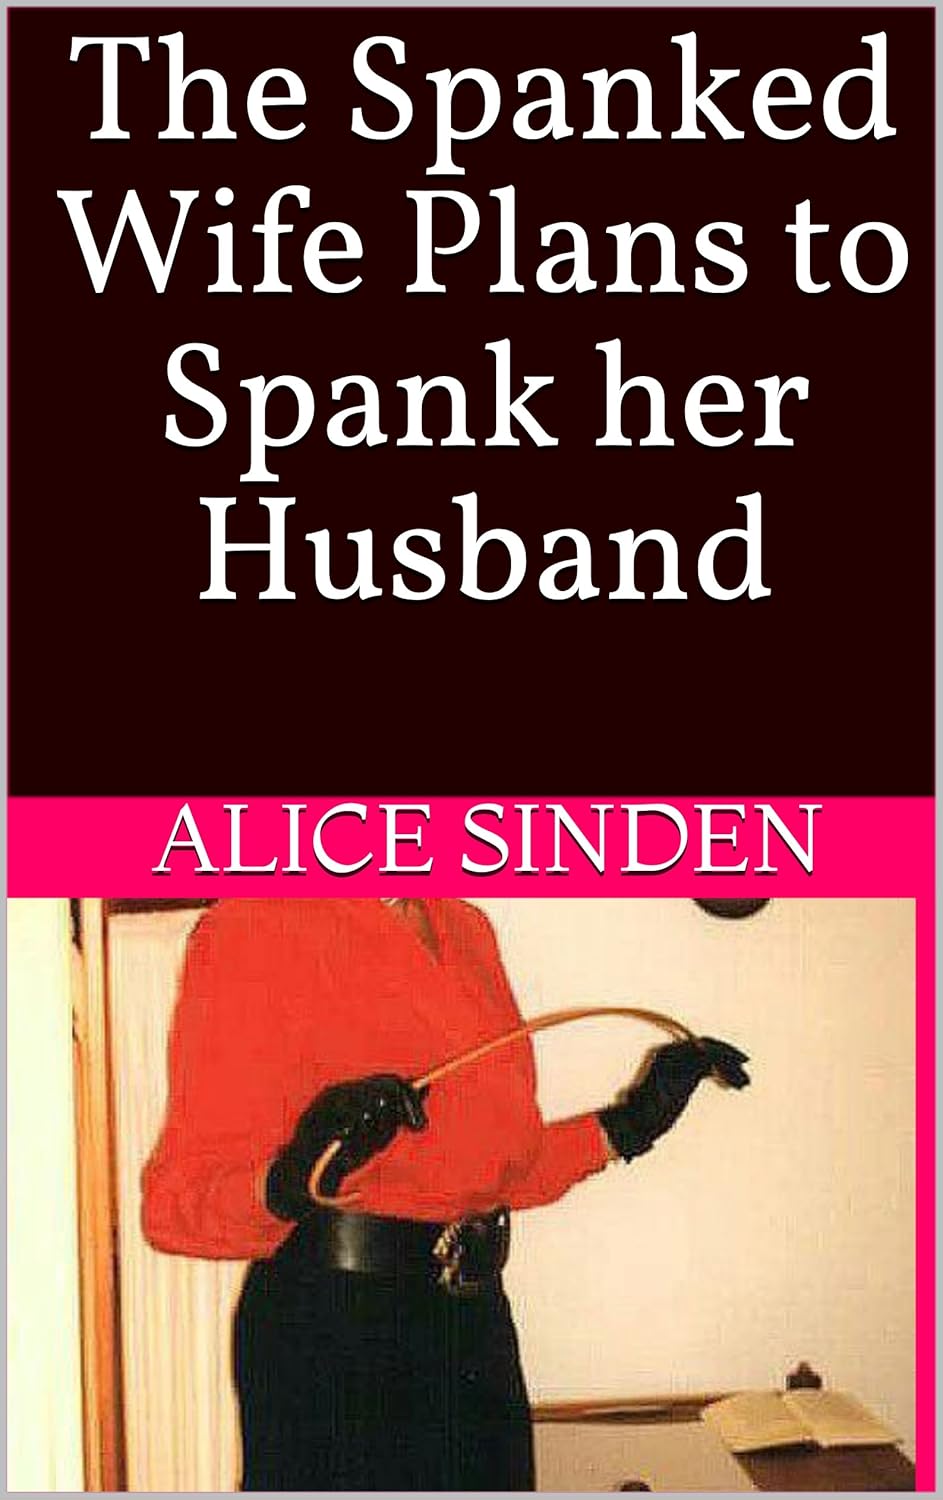 Best of Getting spanked by husband